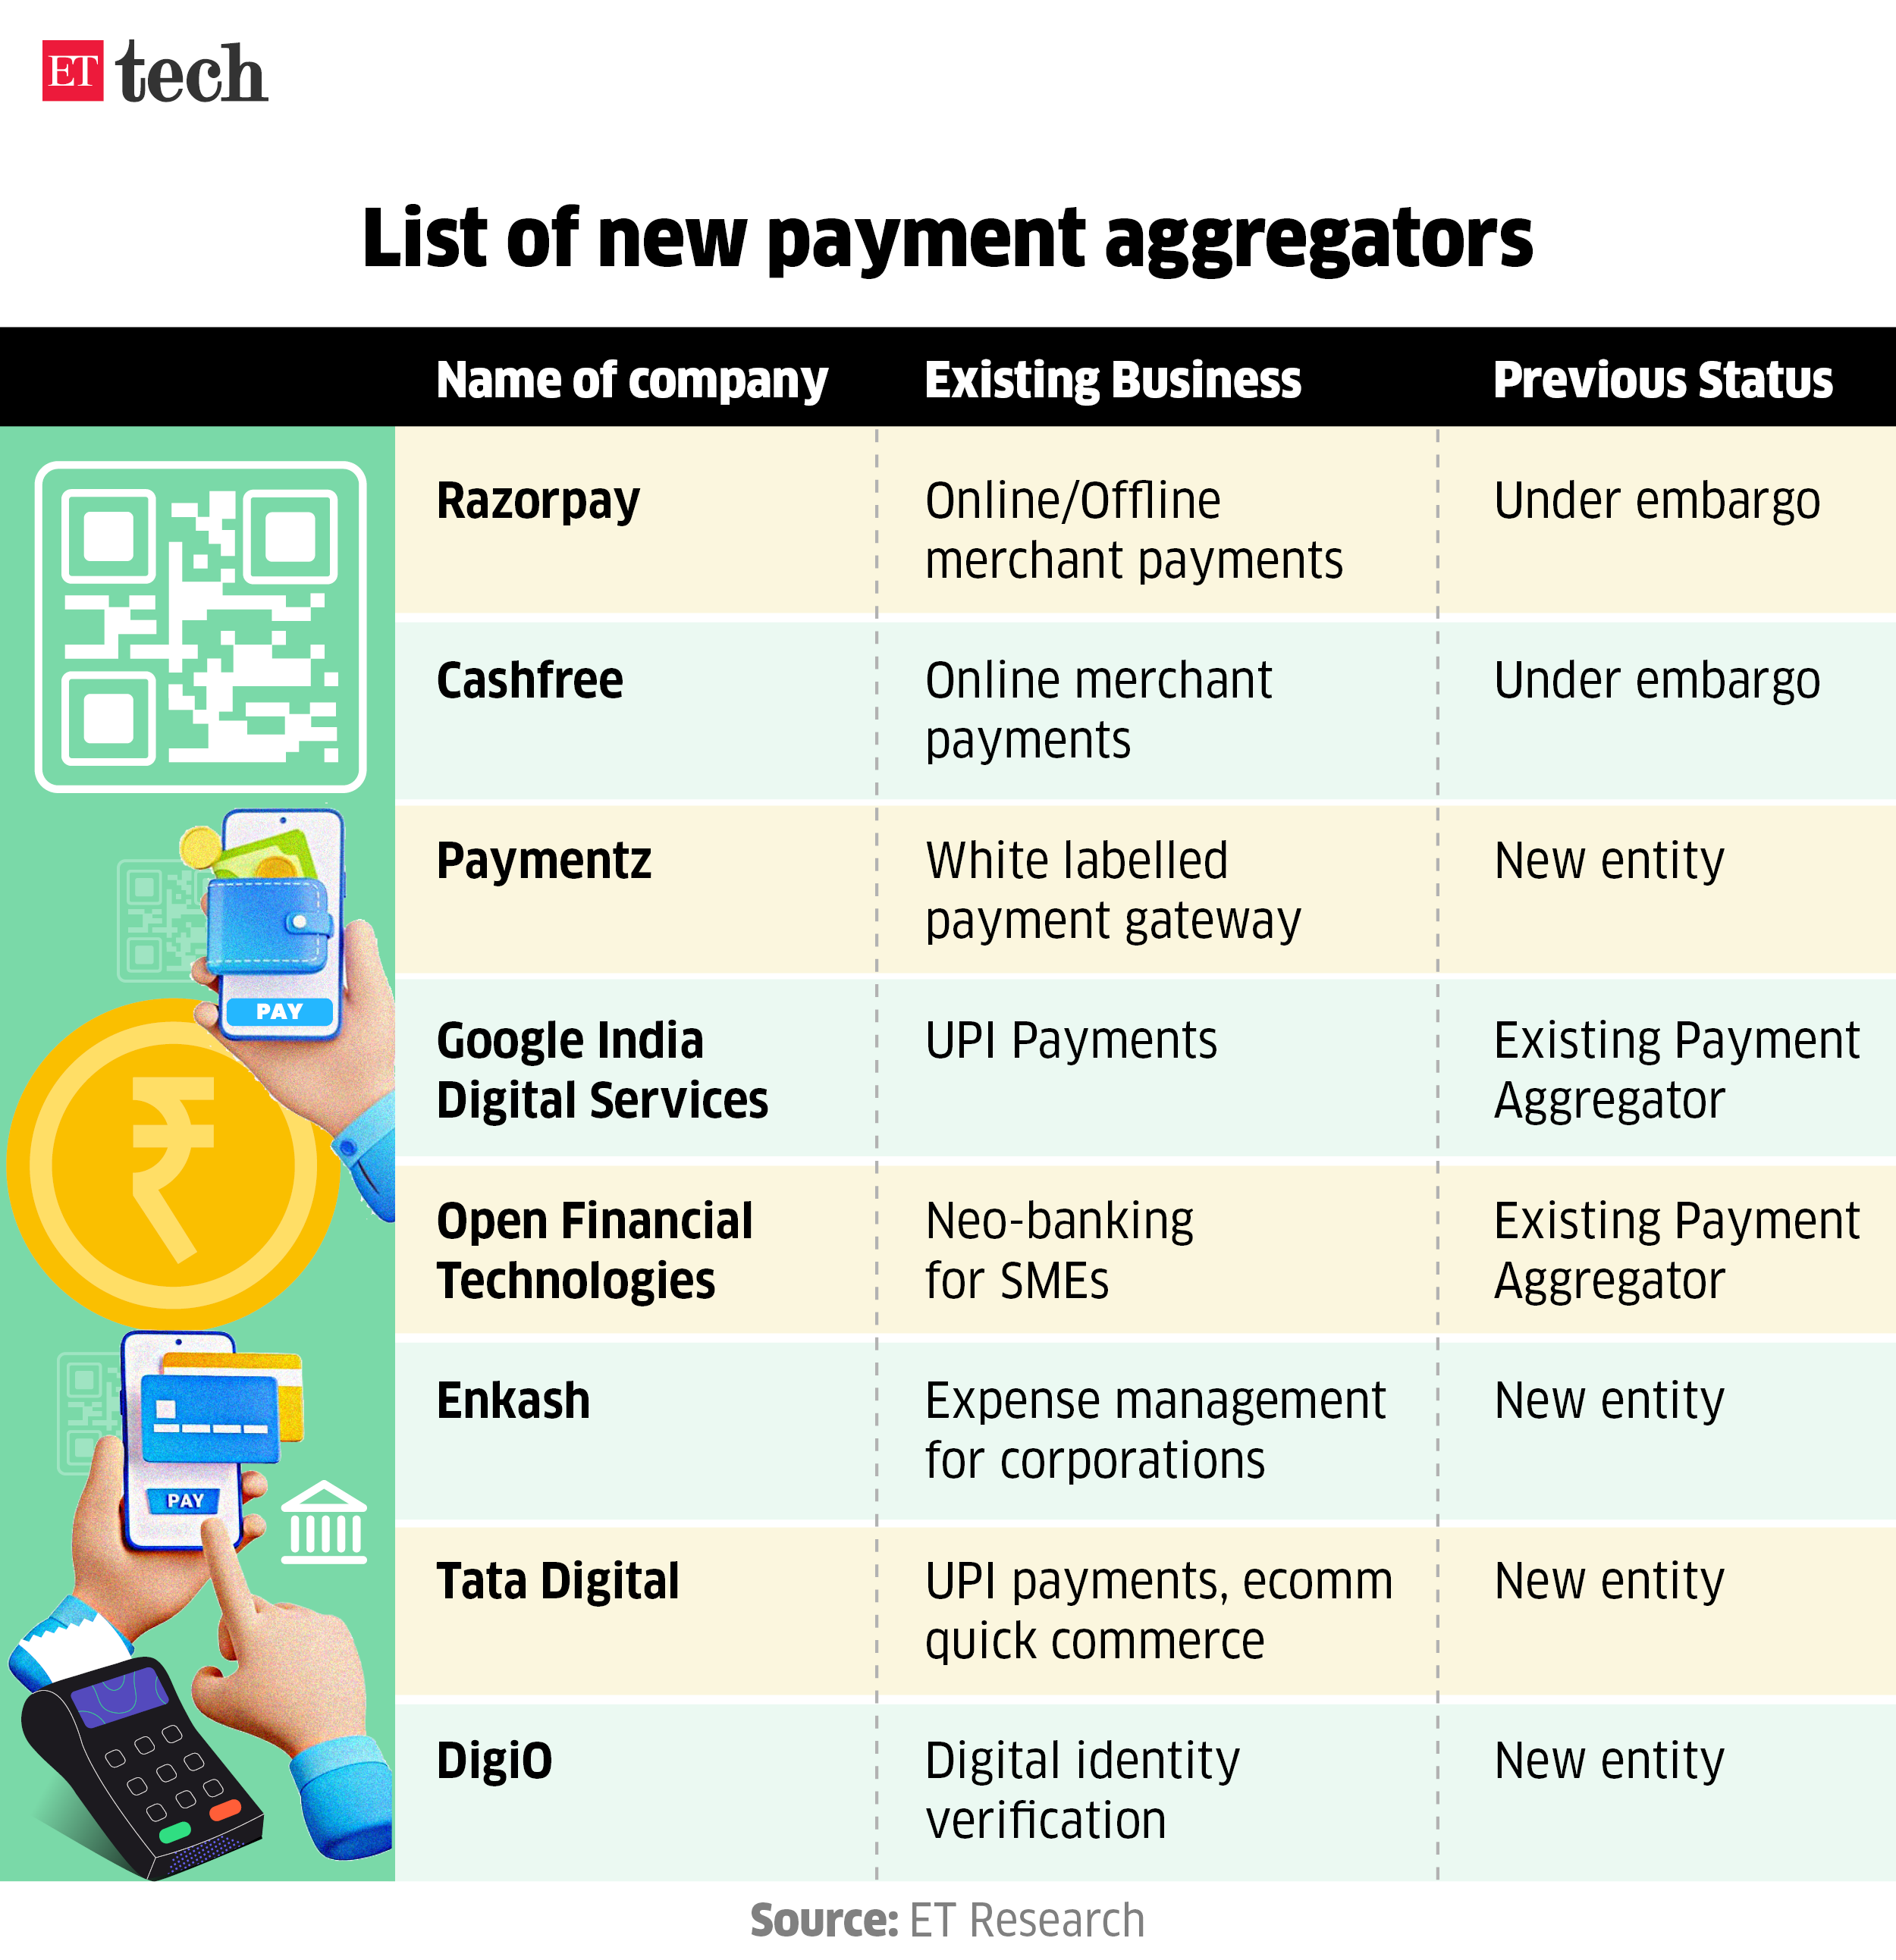 List of new payment aggregators